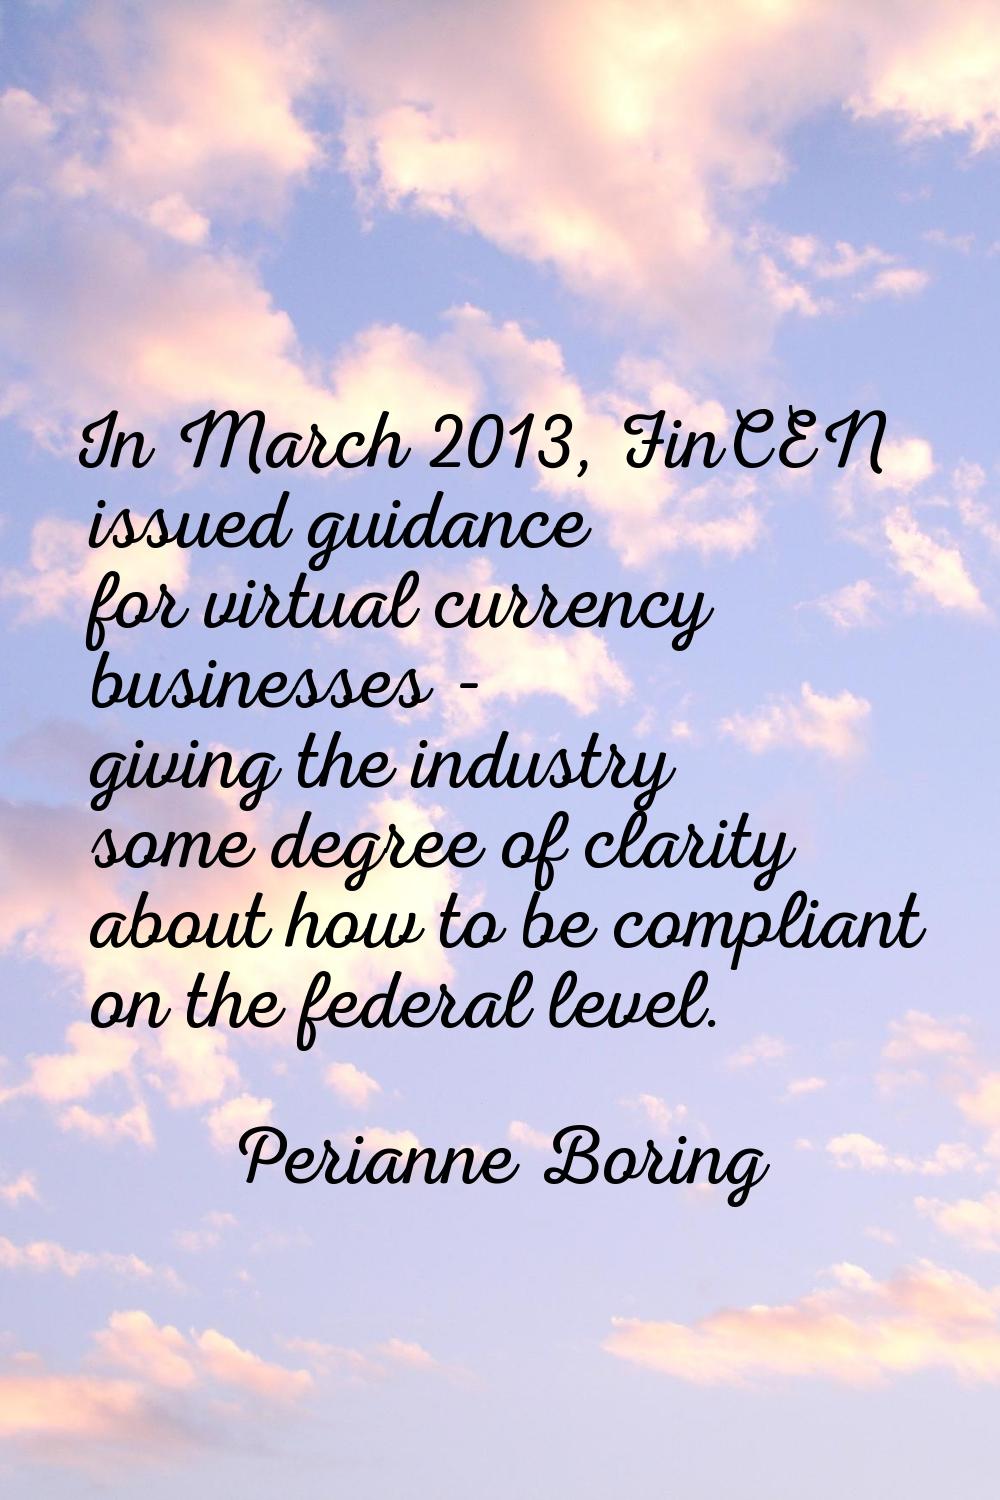 In March 2013, FinCEN issued guidance for virtual currency businesses - giving the industry some de